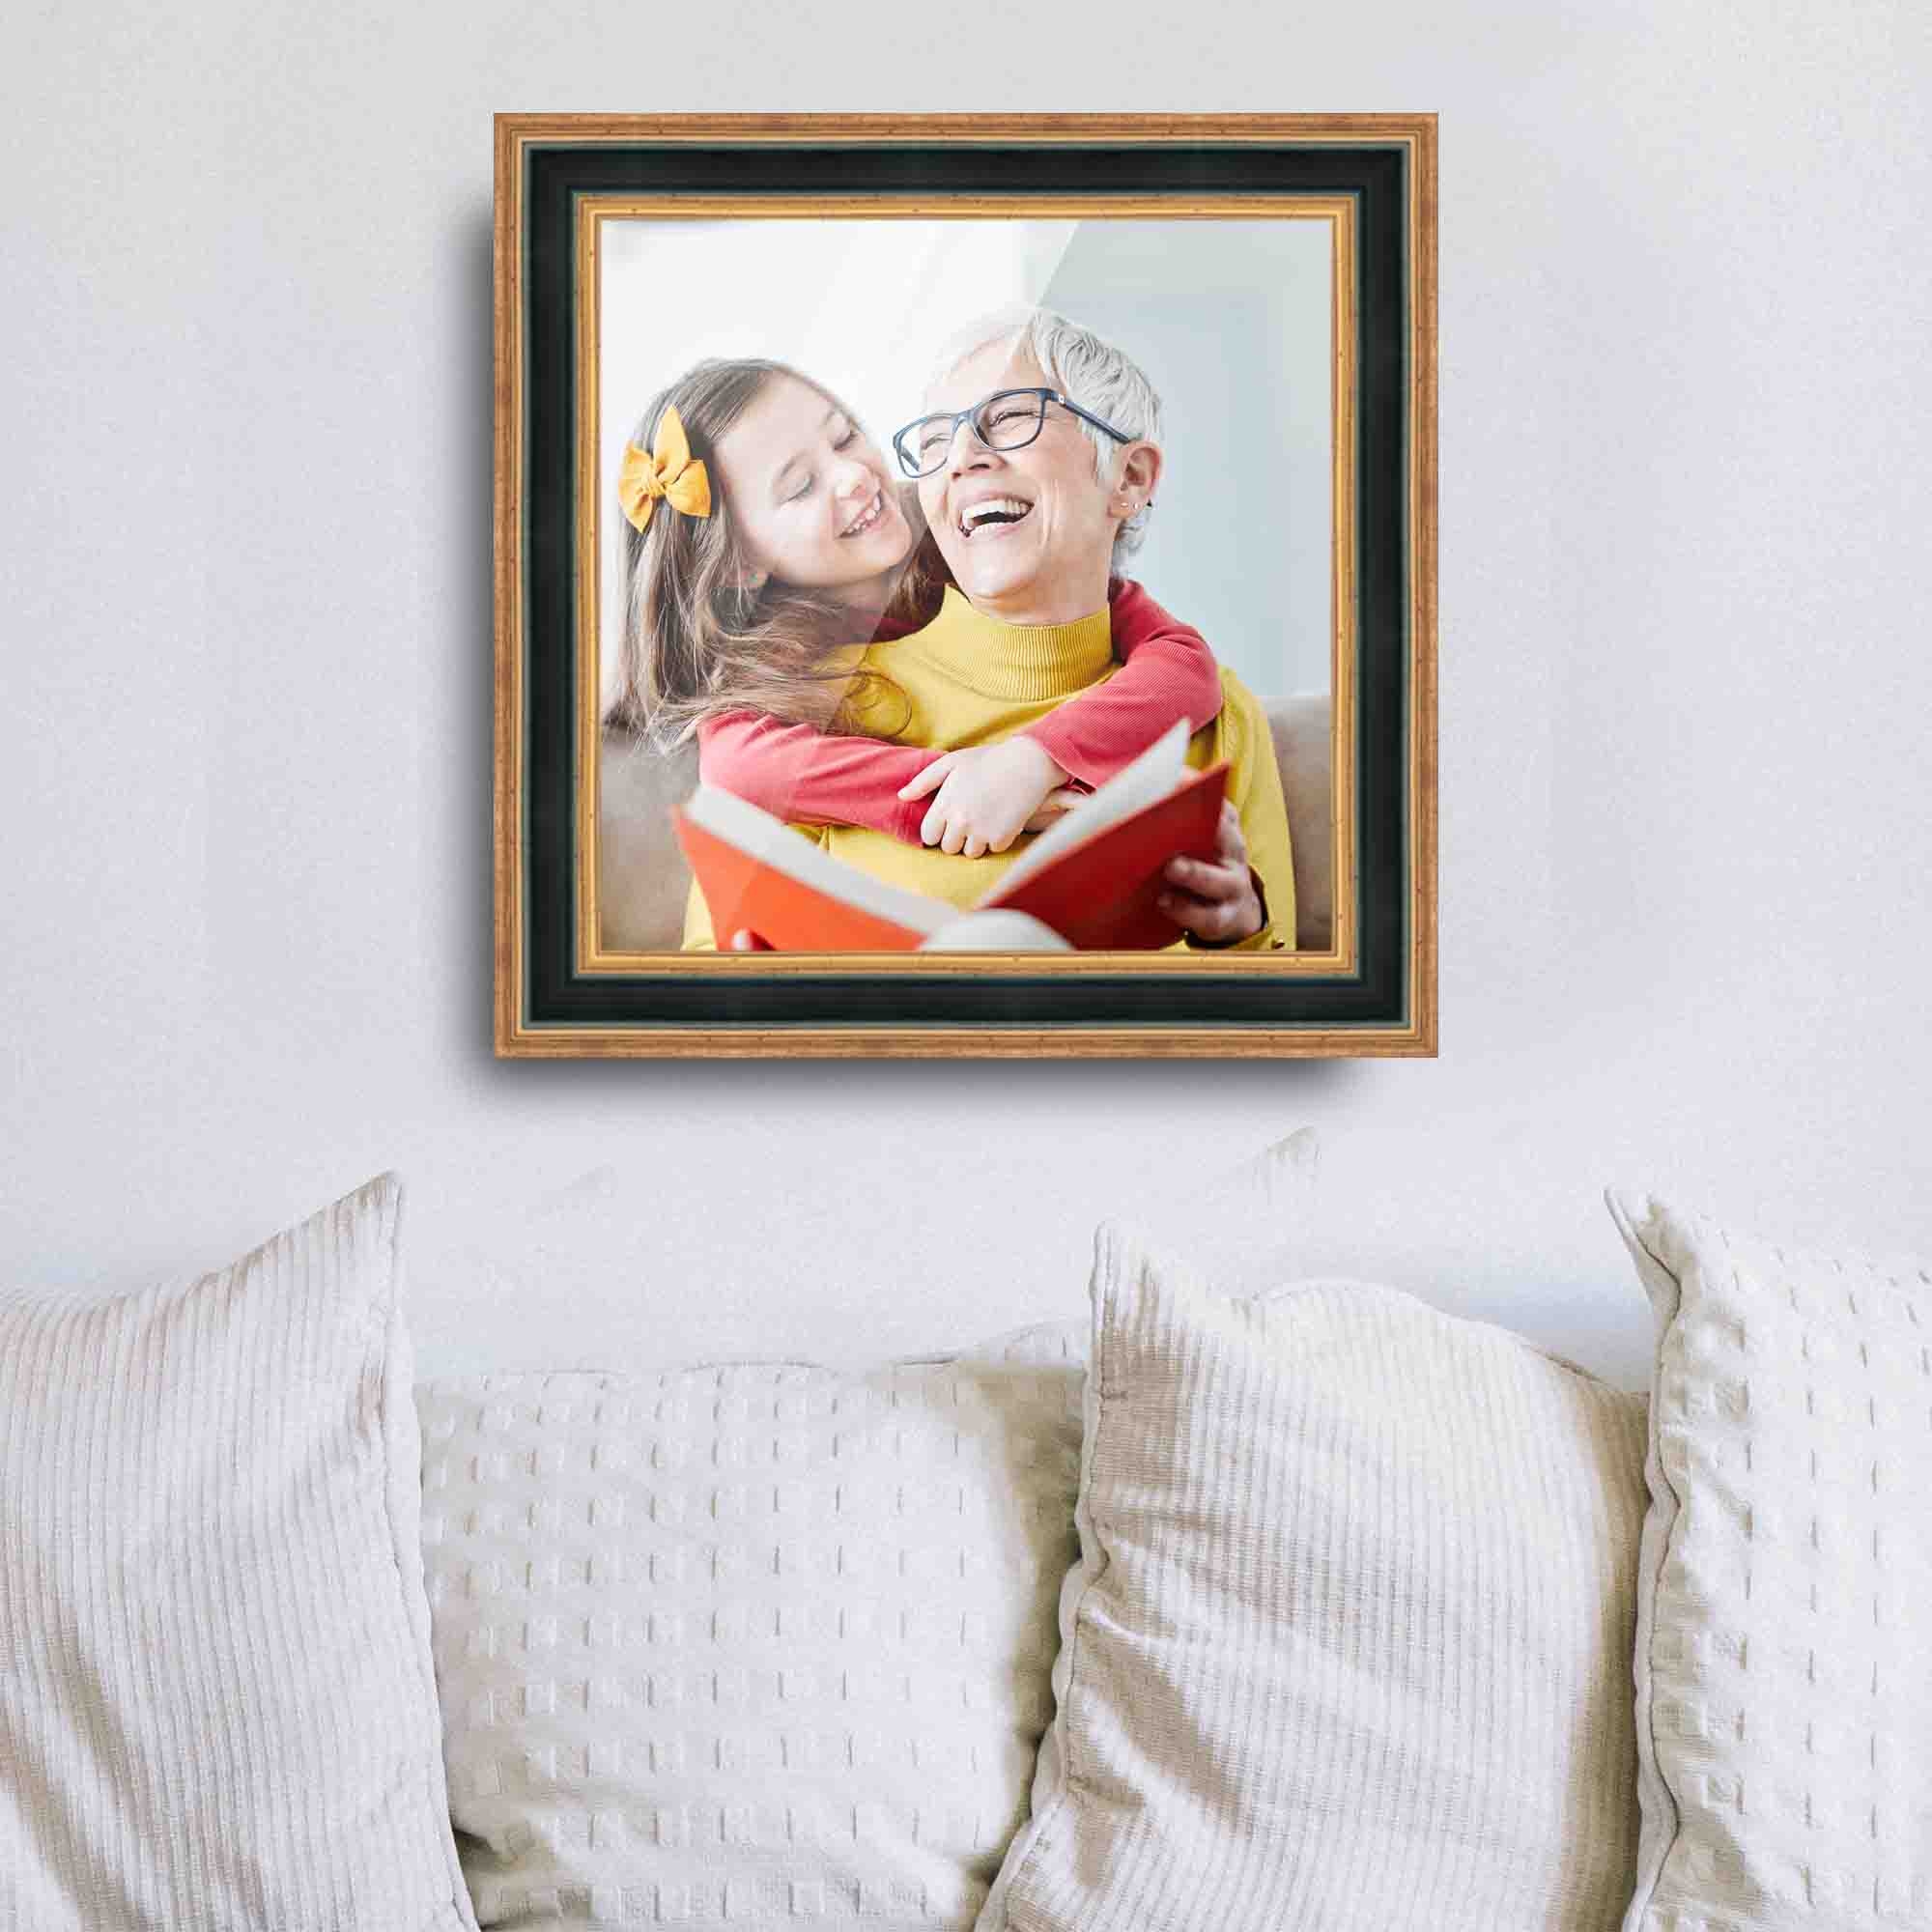 CustomPictureFrames.com 20x20 Frame Gold Real Wood Picture Frame Width 1.75 Inches | Interior Frame Depth 0.5 Inches | Serpero Traditional Photo Frame